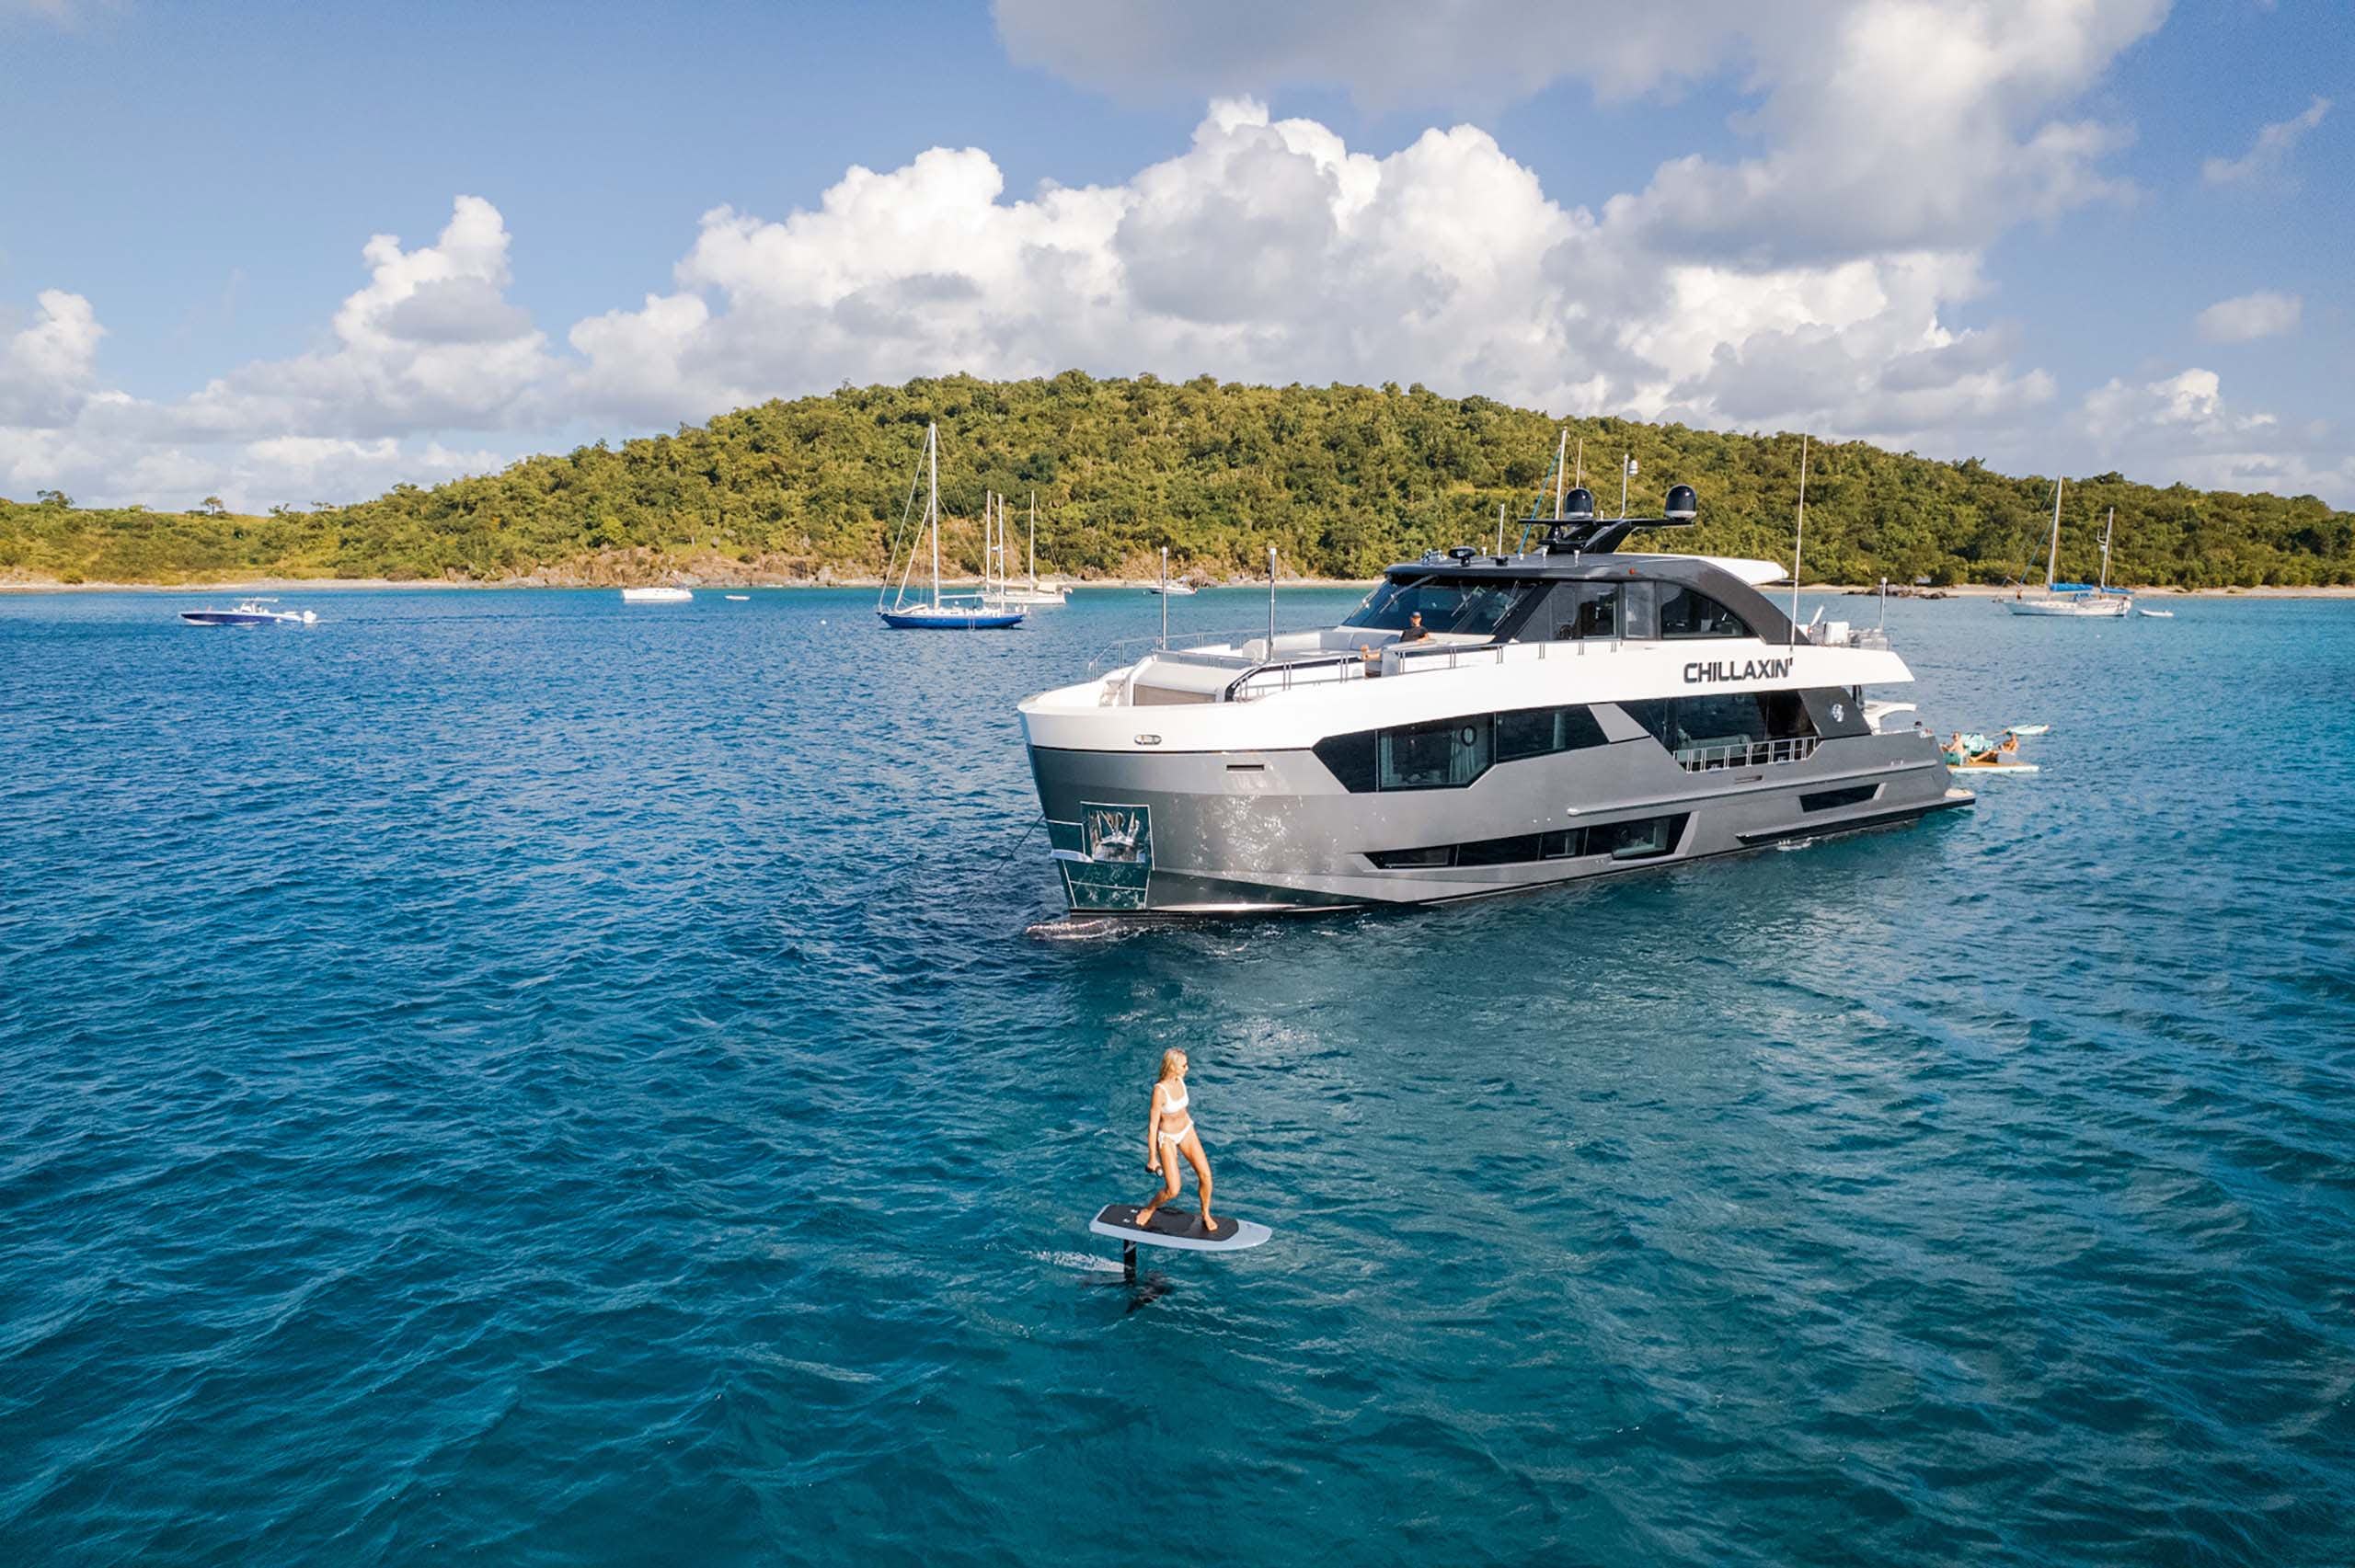 Charter yacht for 6 to 8 guests at anchor with woman cruising the blue waters on hydrofoil board